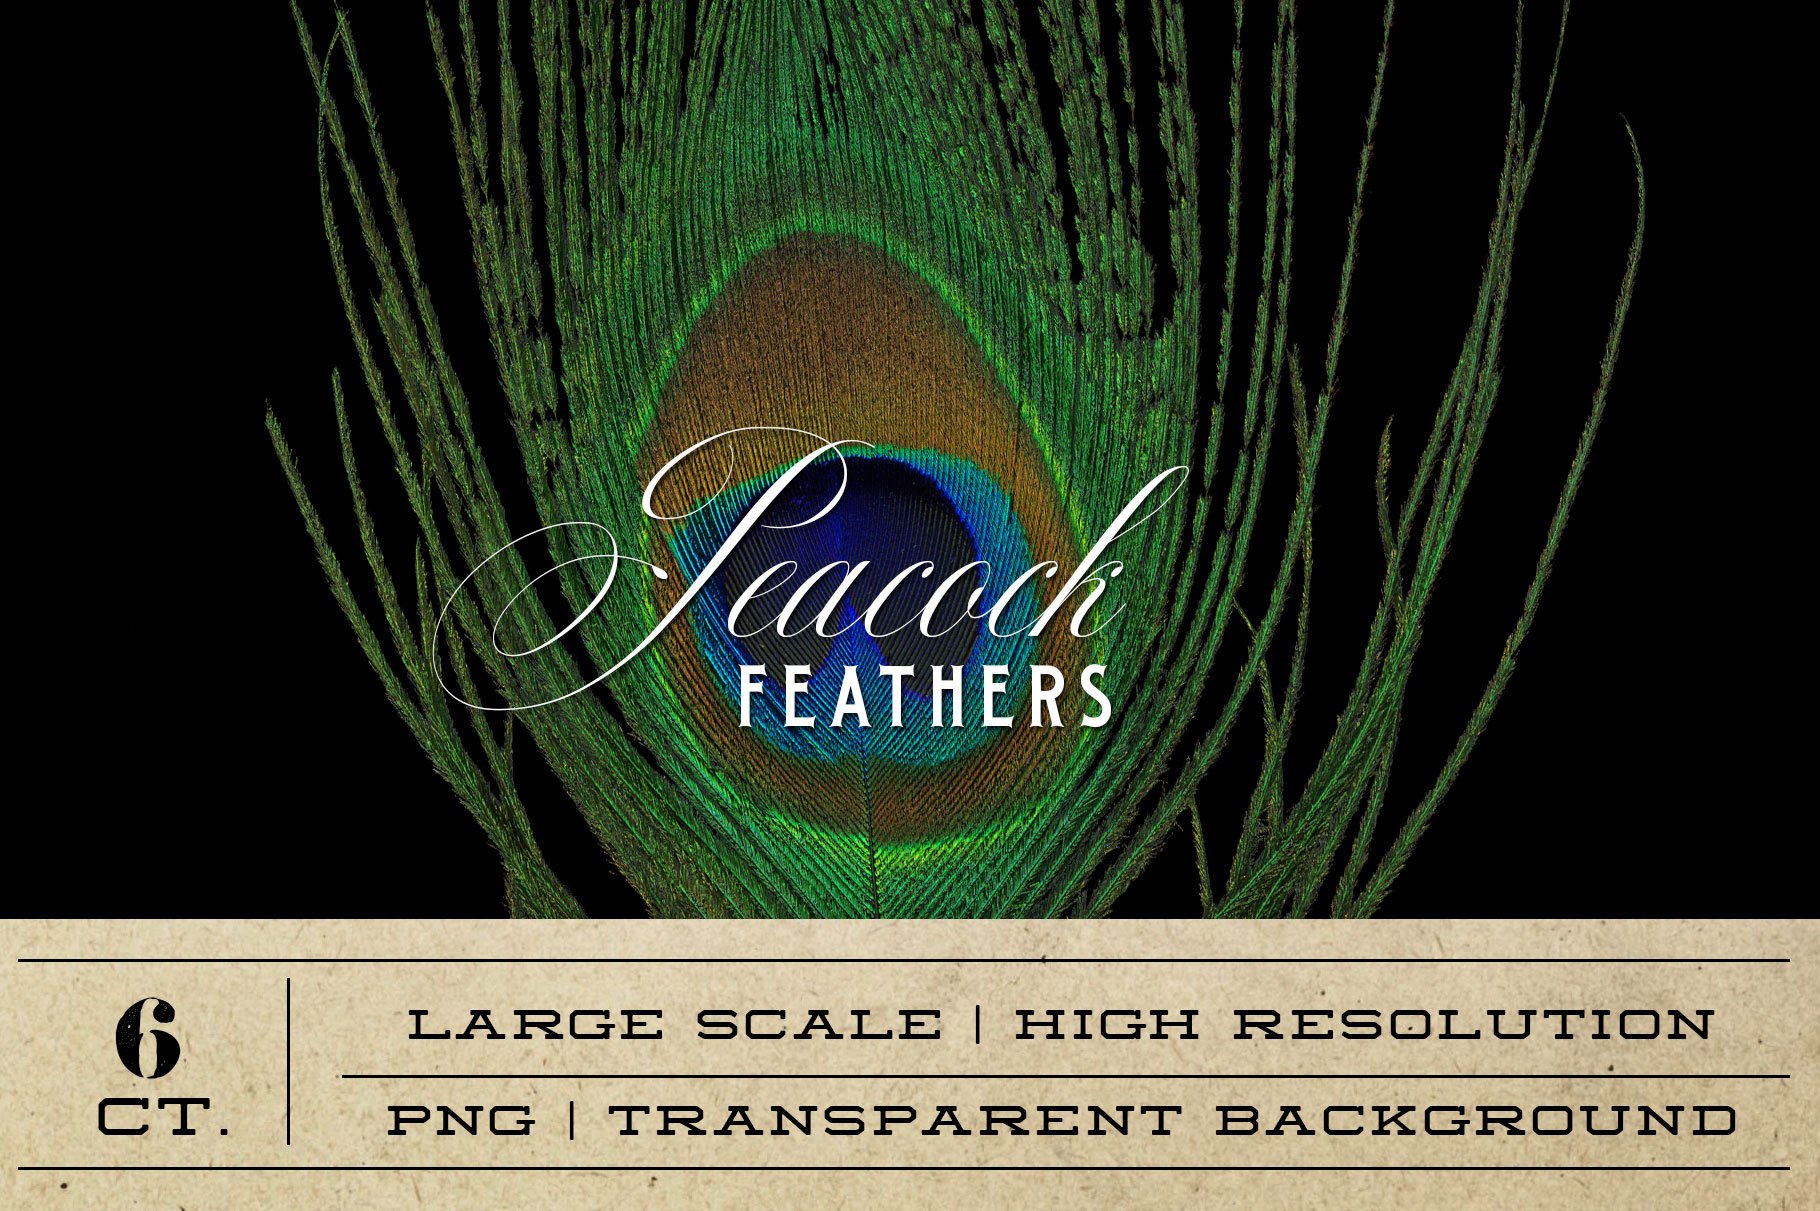 Peacock Feather Graphics cover image.